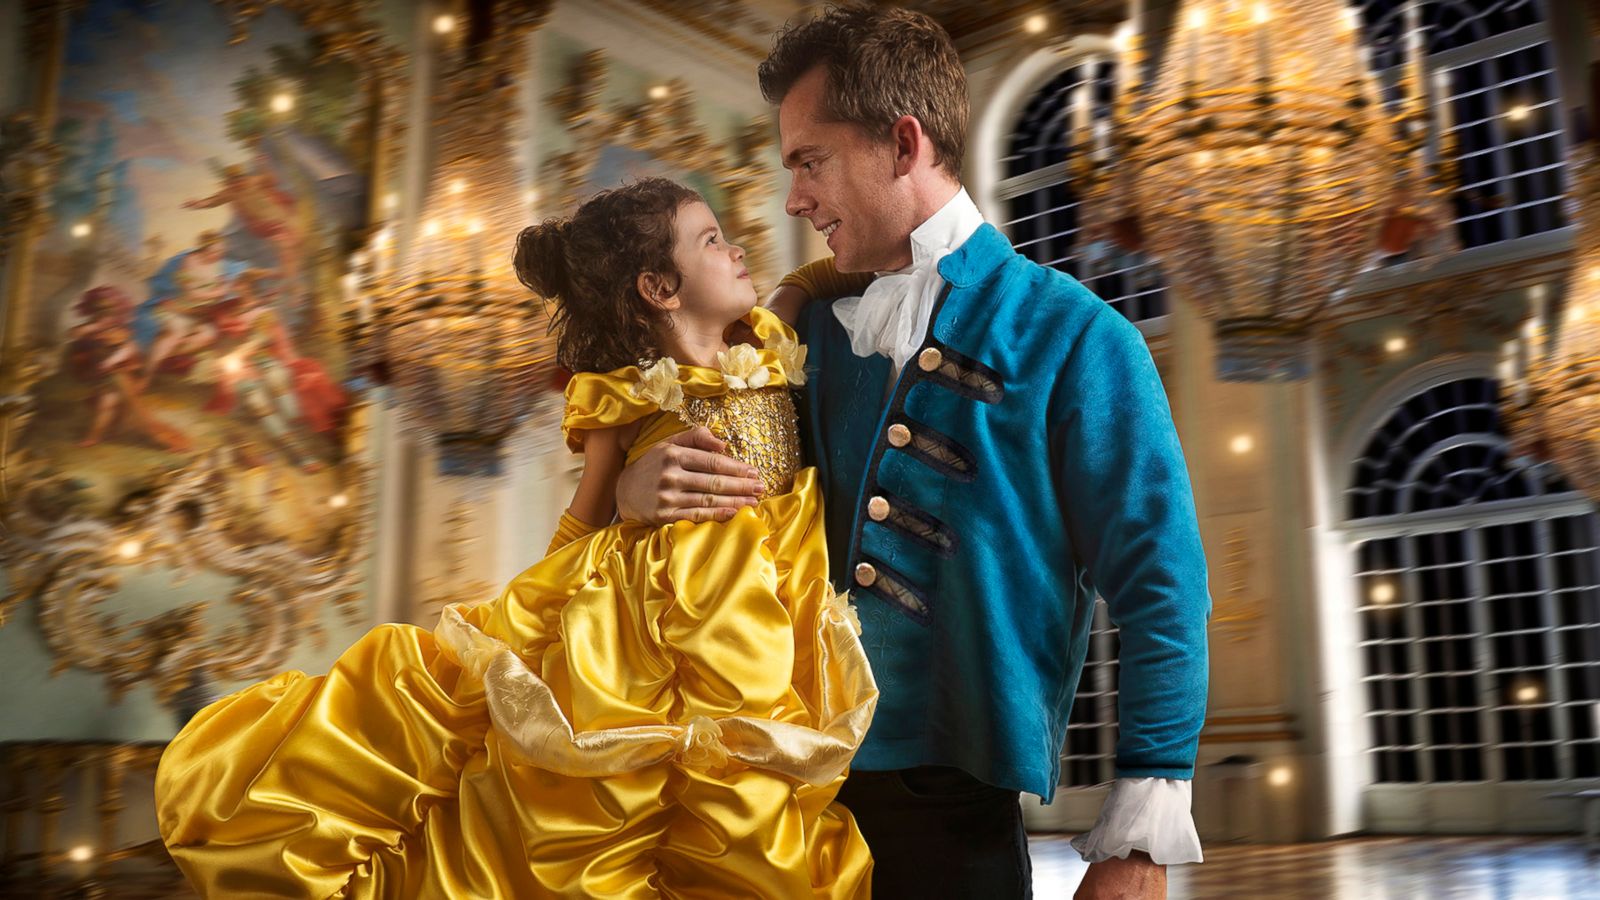 Dad gives daughter authentic princess treatment with 'Beauty and the Beast'  photo shoot - ABC News